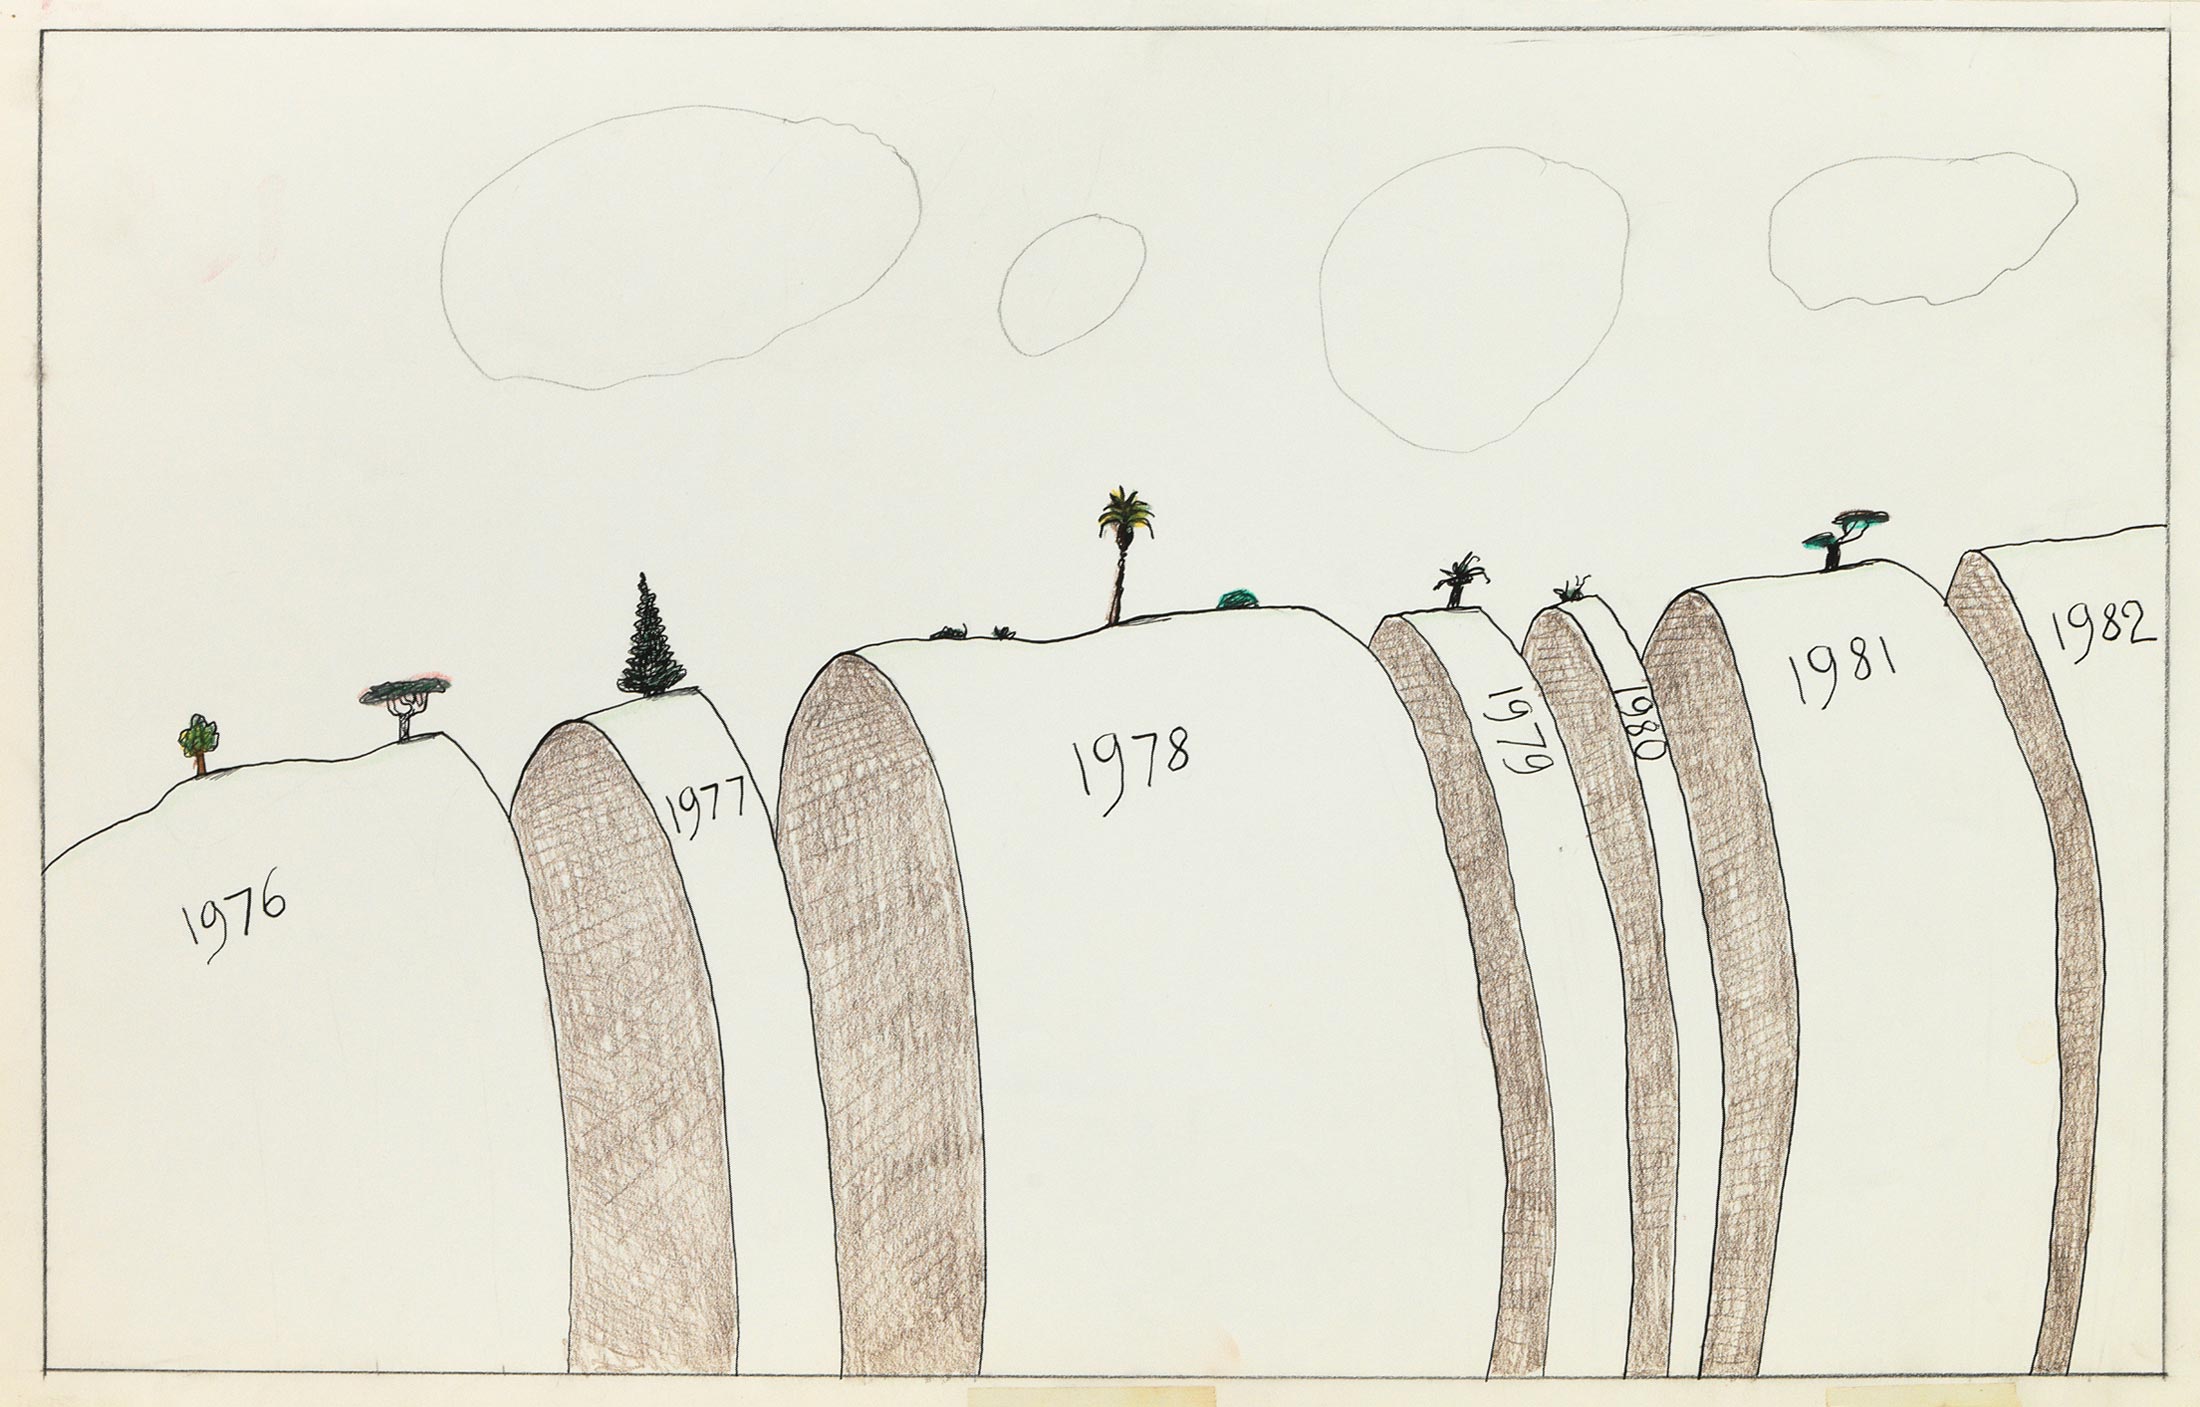 Original drawing for the portfolio “Statistics,” The New Yorker, February 21, 1983. Ink, colored pencil, and pencil on paper, 14 ¼ x 23 ¼ in. Centre Pompidou, Paris; Gift of The Saul Steinberg Foundation.